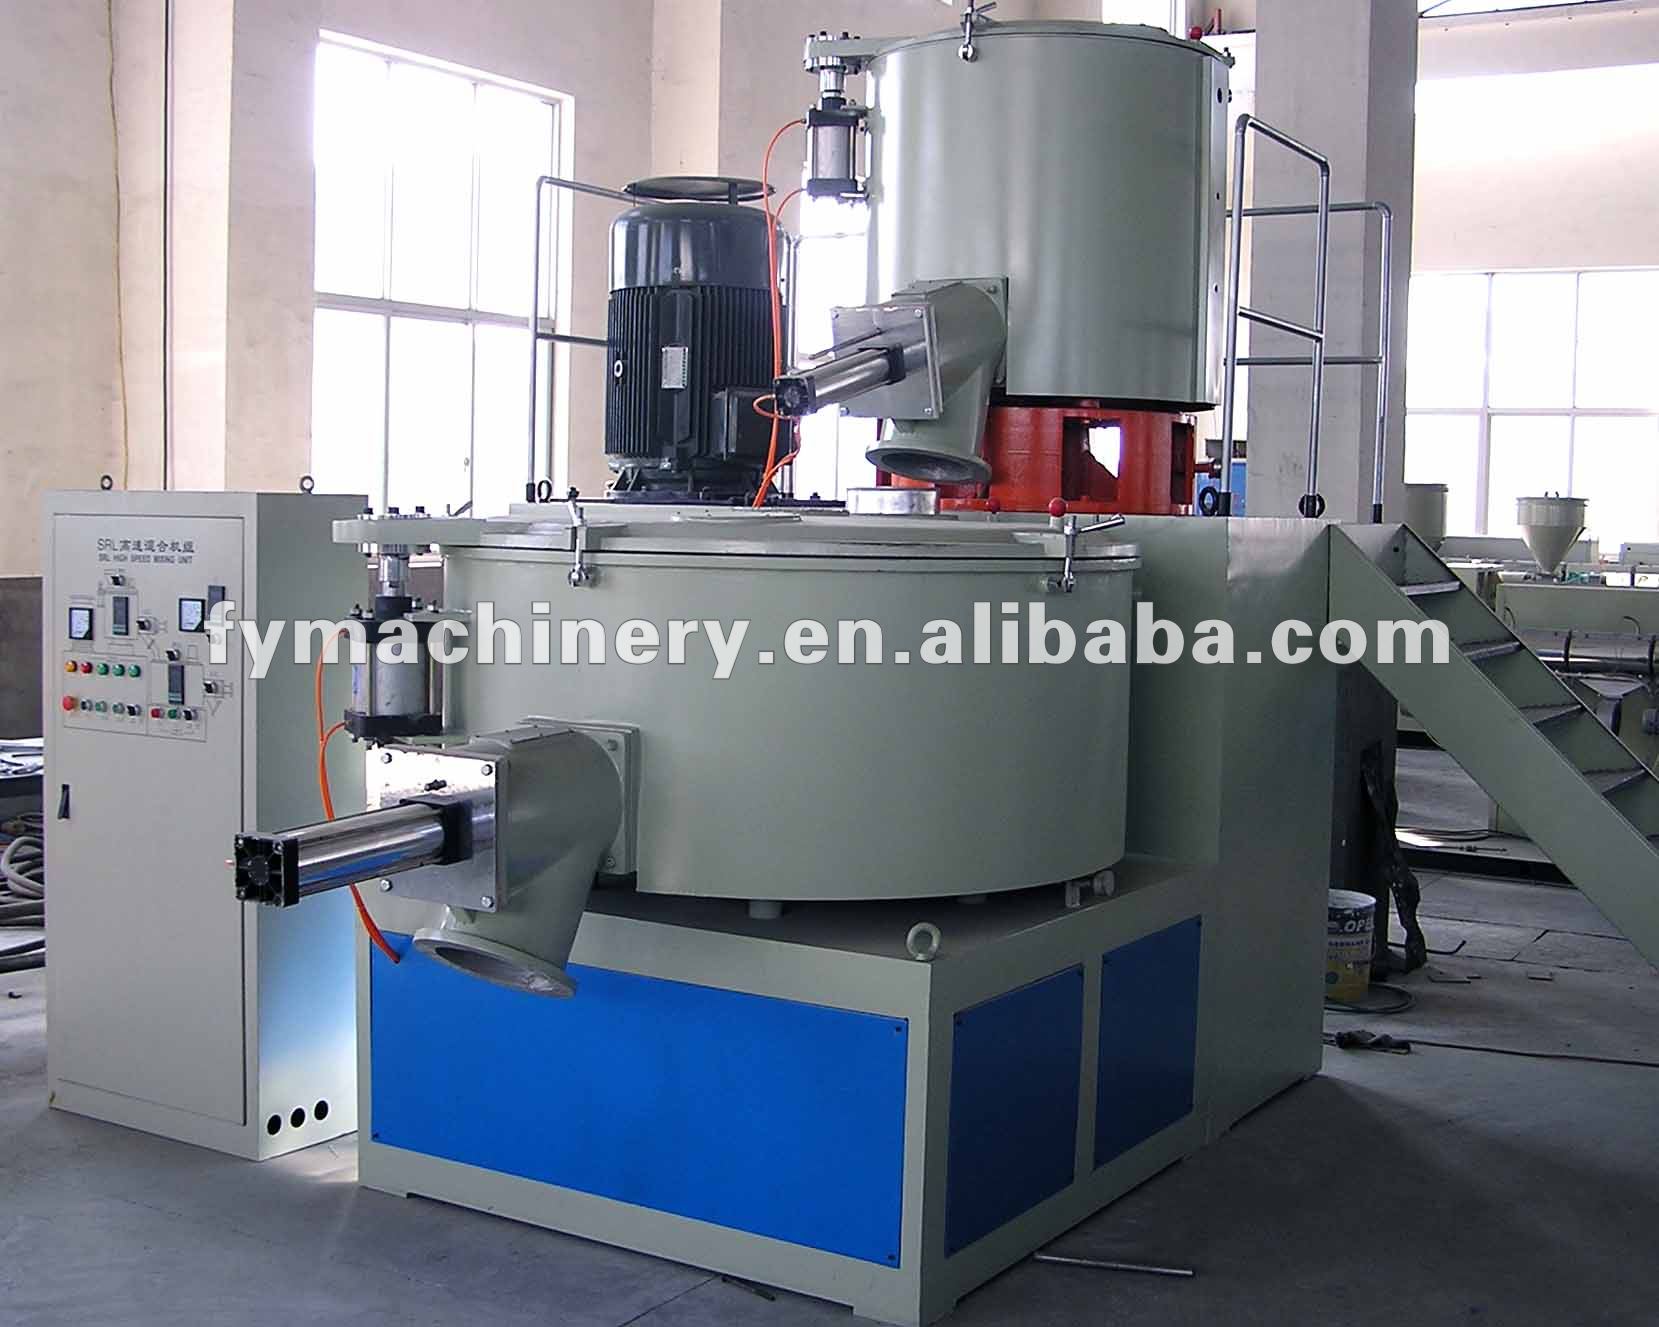 High effiency and quality dry powder mixer